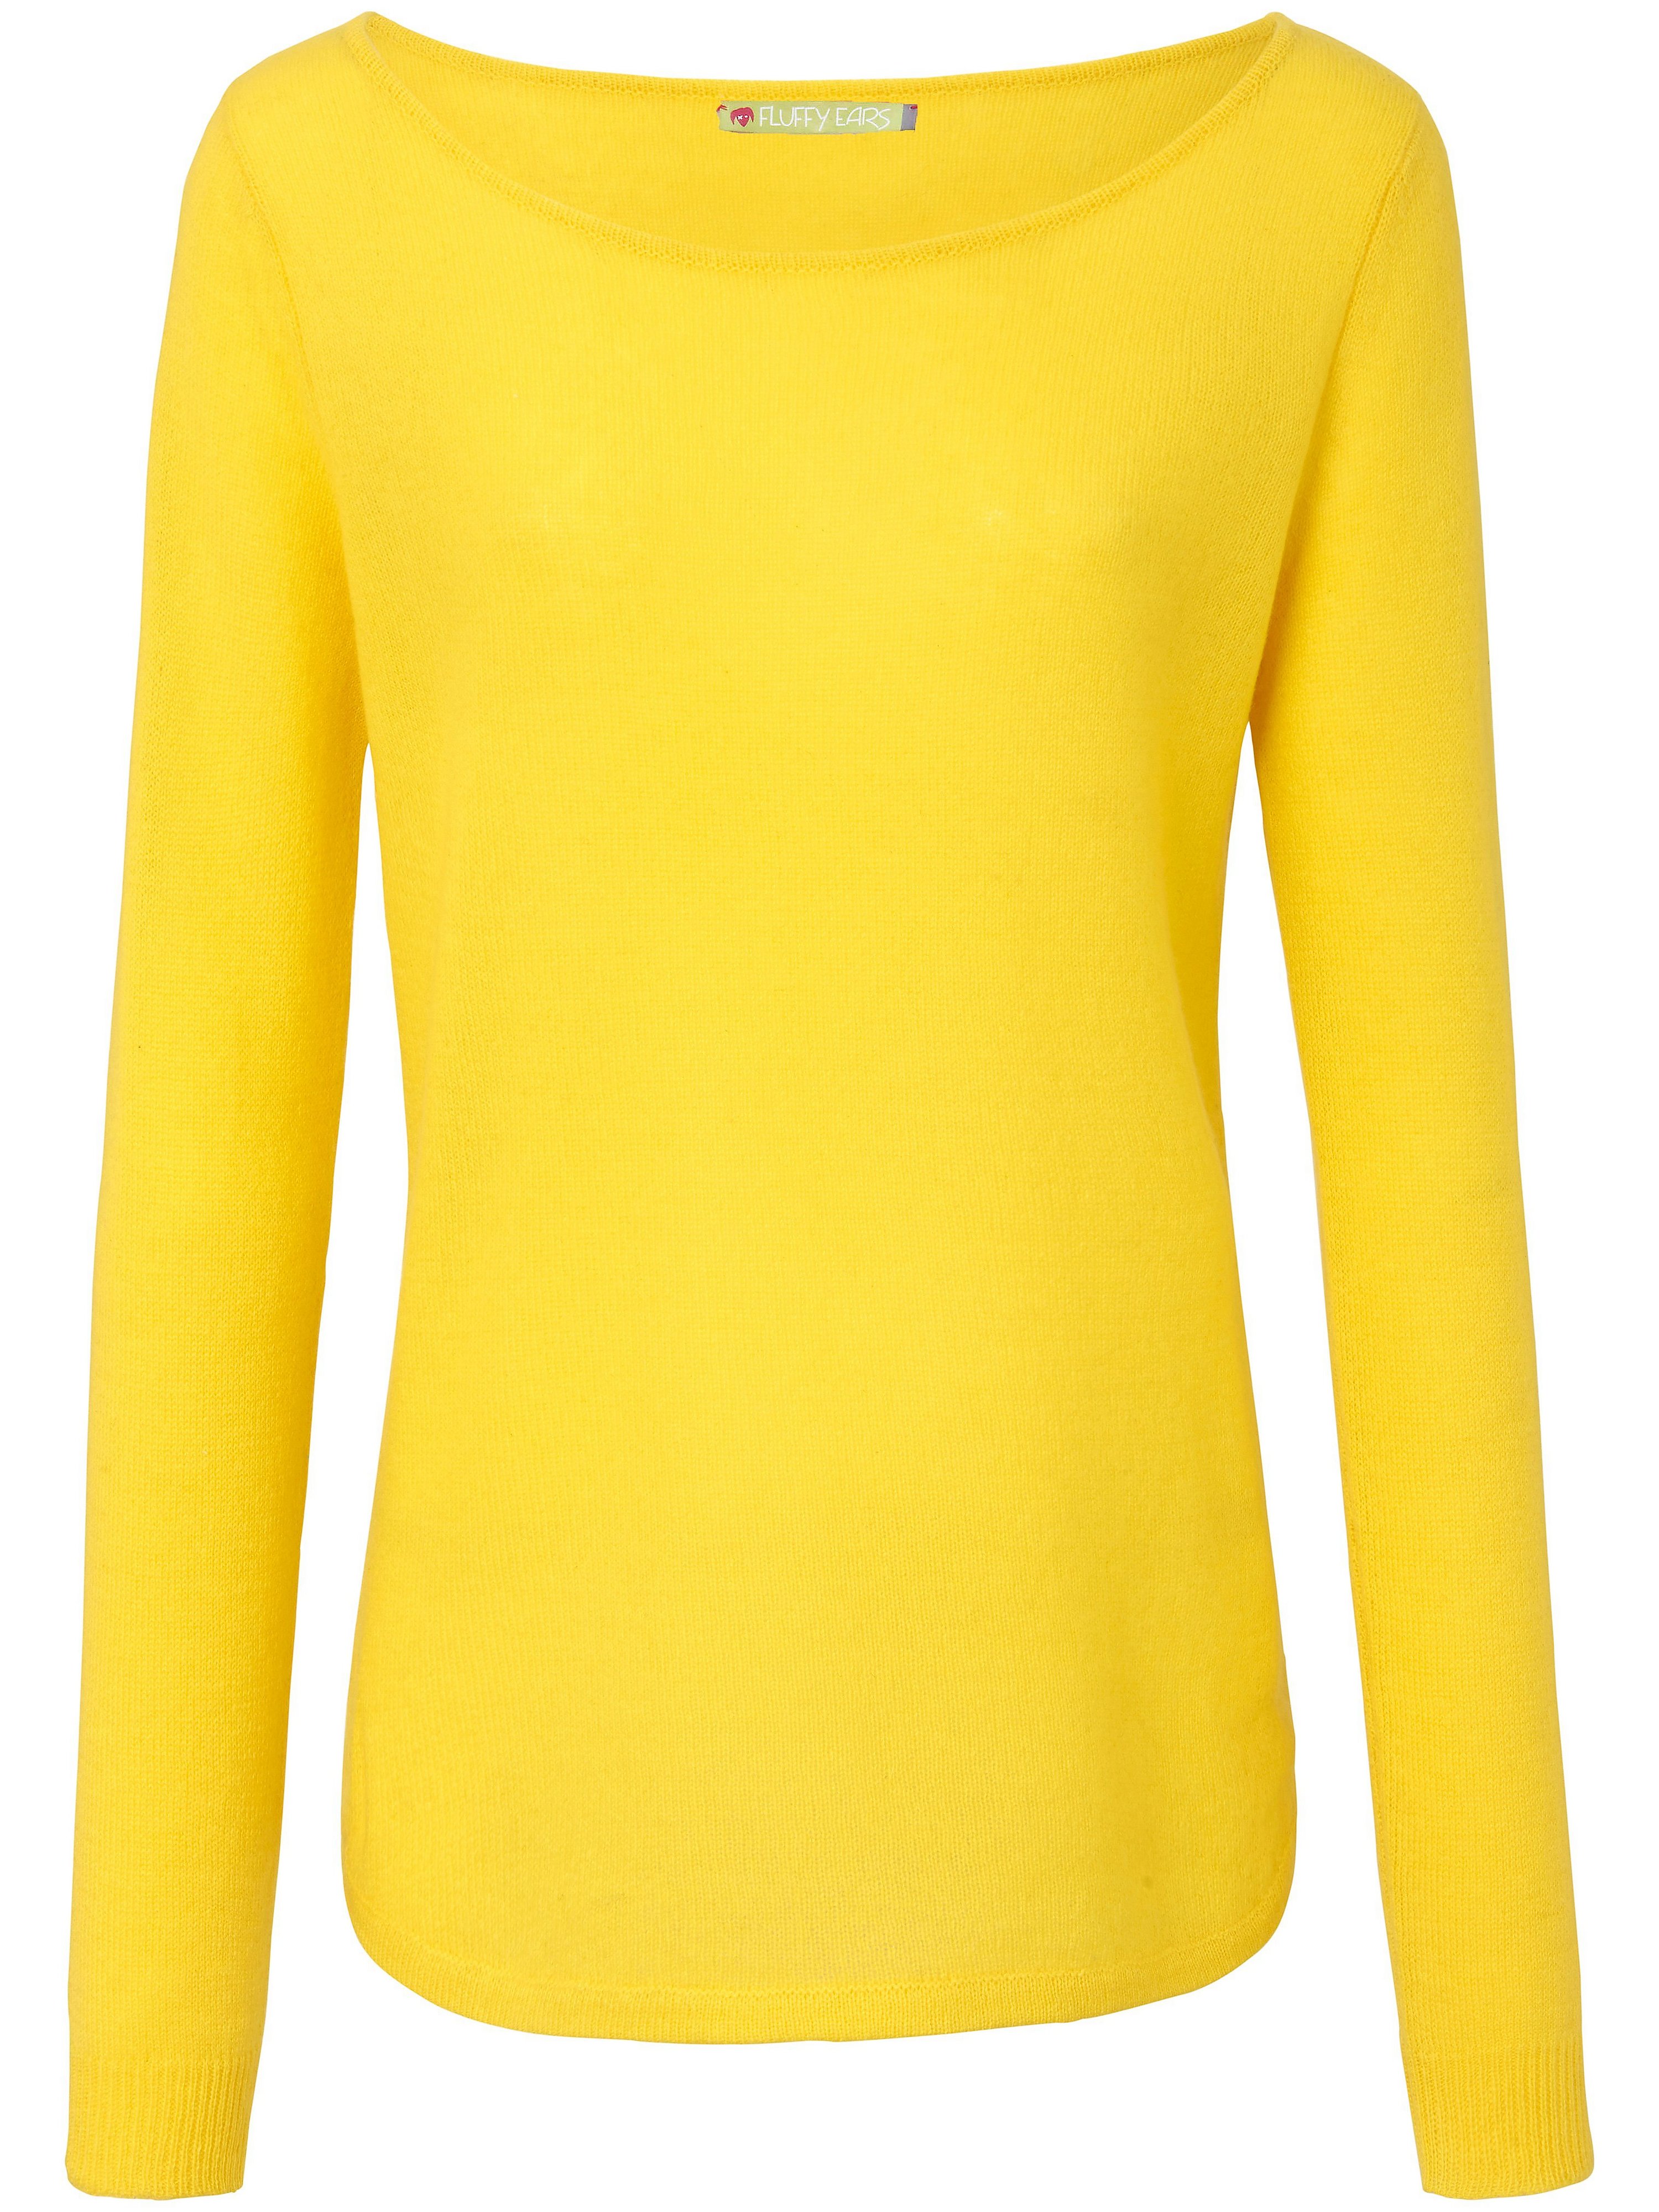 Le pull 100% cachemire  FLUFFY EARS jaune taille 50